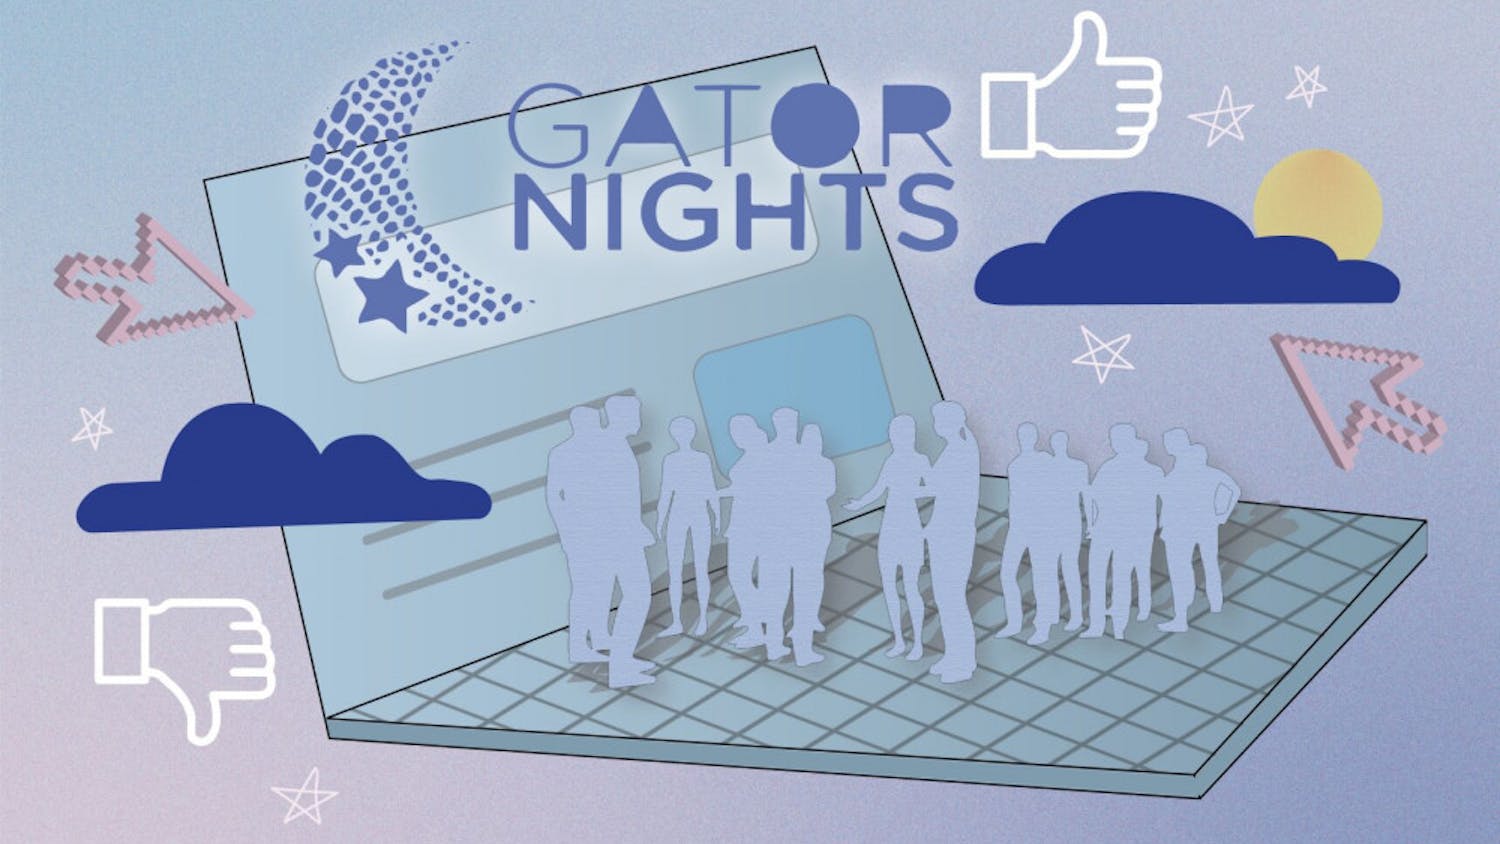 GatorNights continues to host free events for UF students during the Summer
&nbsp;